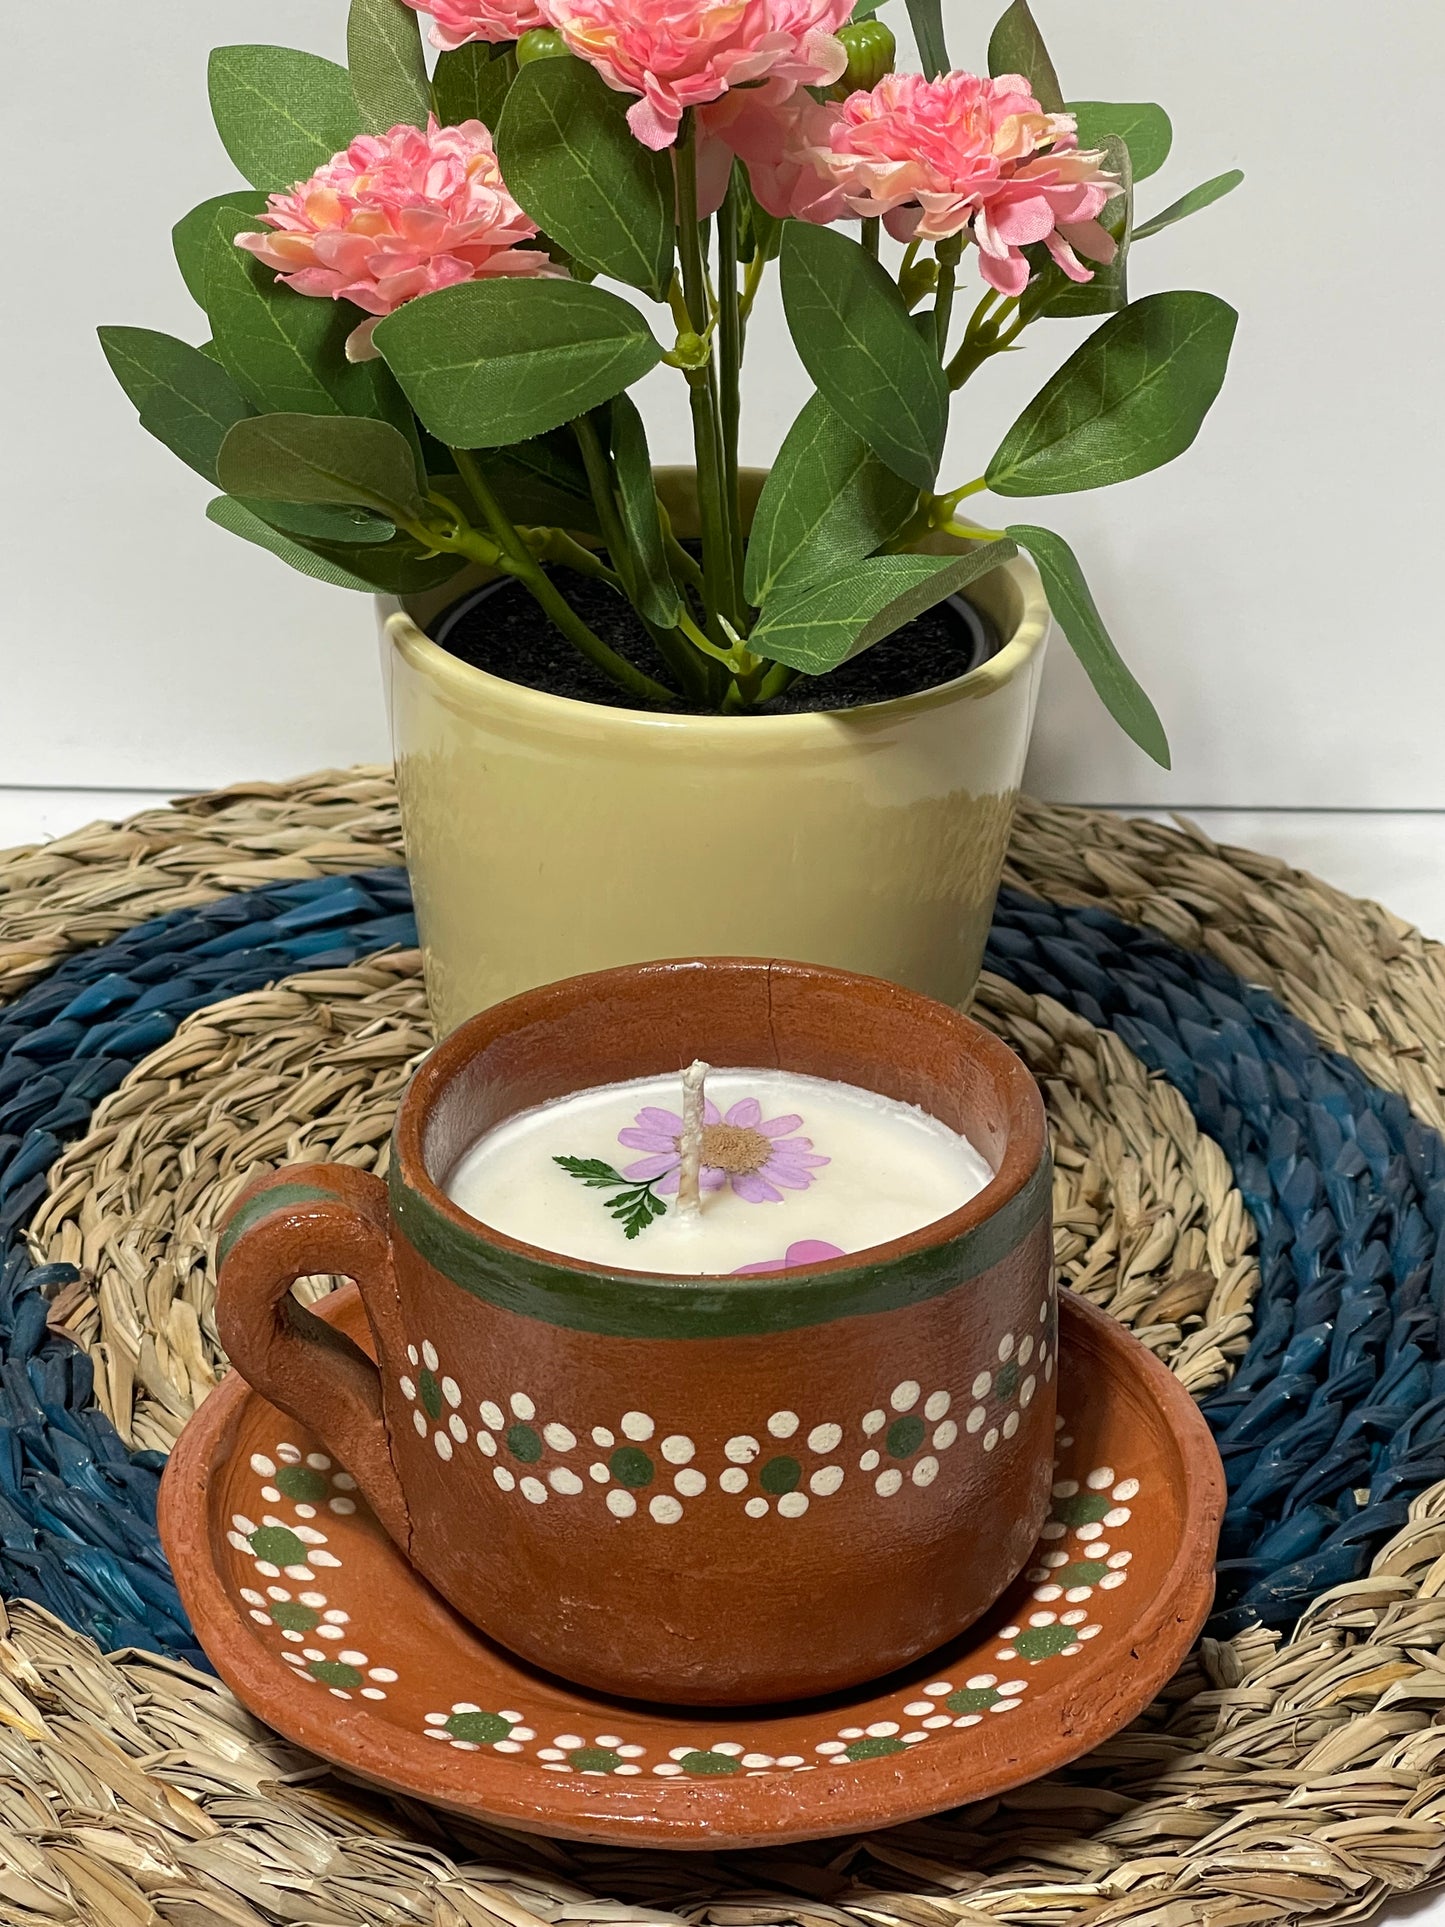 Mother’s Day Sale! Tazita scented candle/Mexican Scented Candle/ Hand Poured/Tazita Gift Set /Mexican Rustic Candle Mug Scented/Mothers day gift/valentines gif